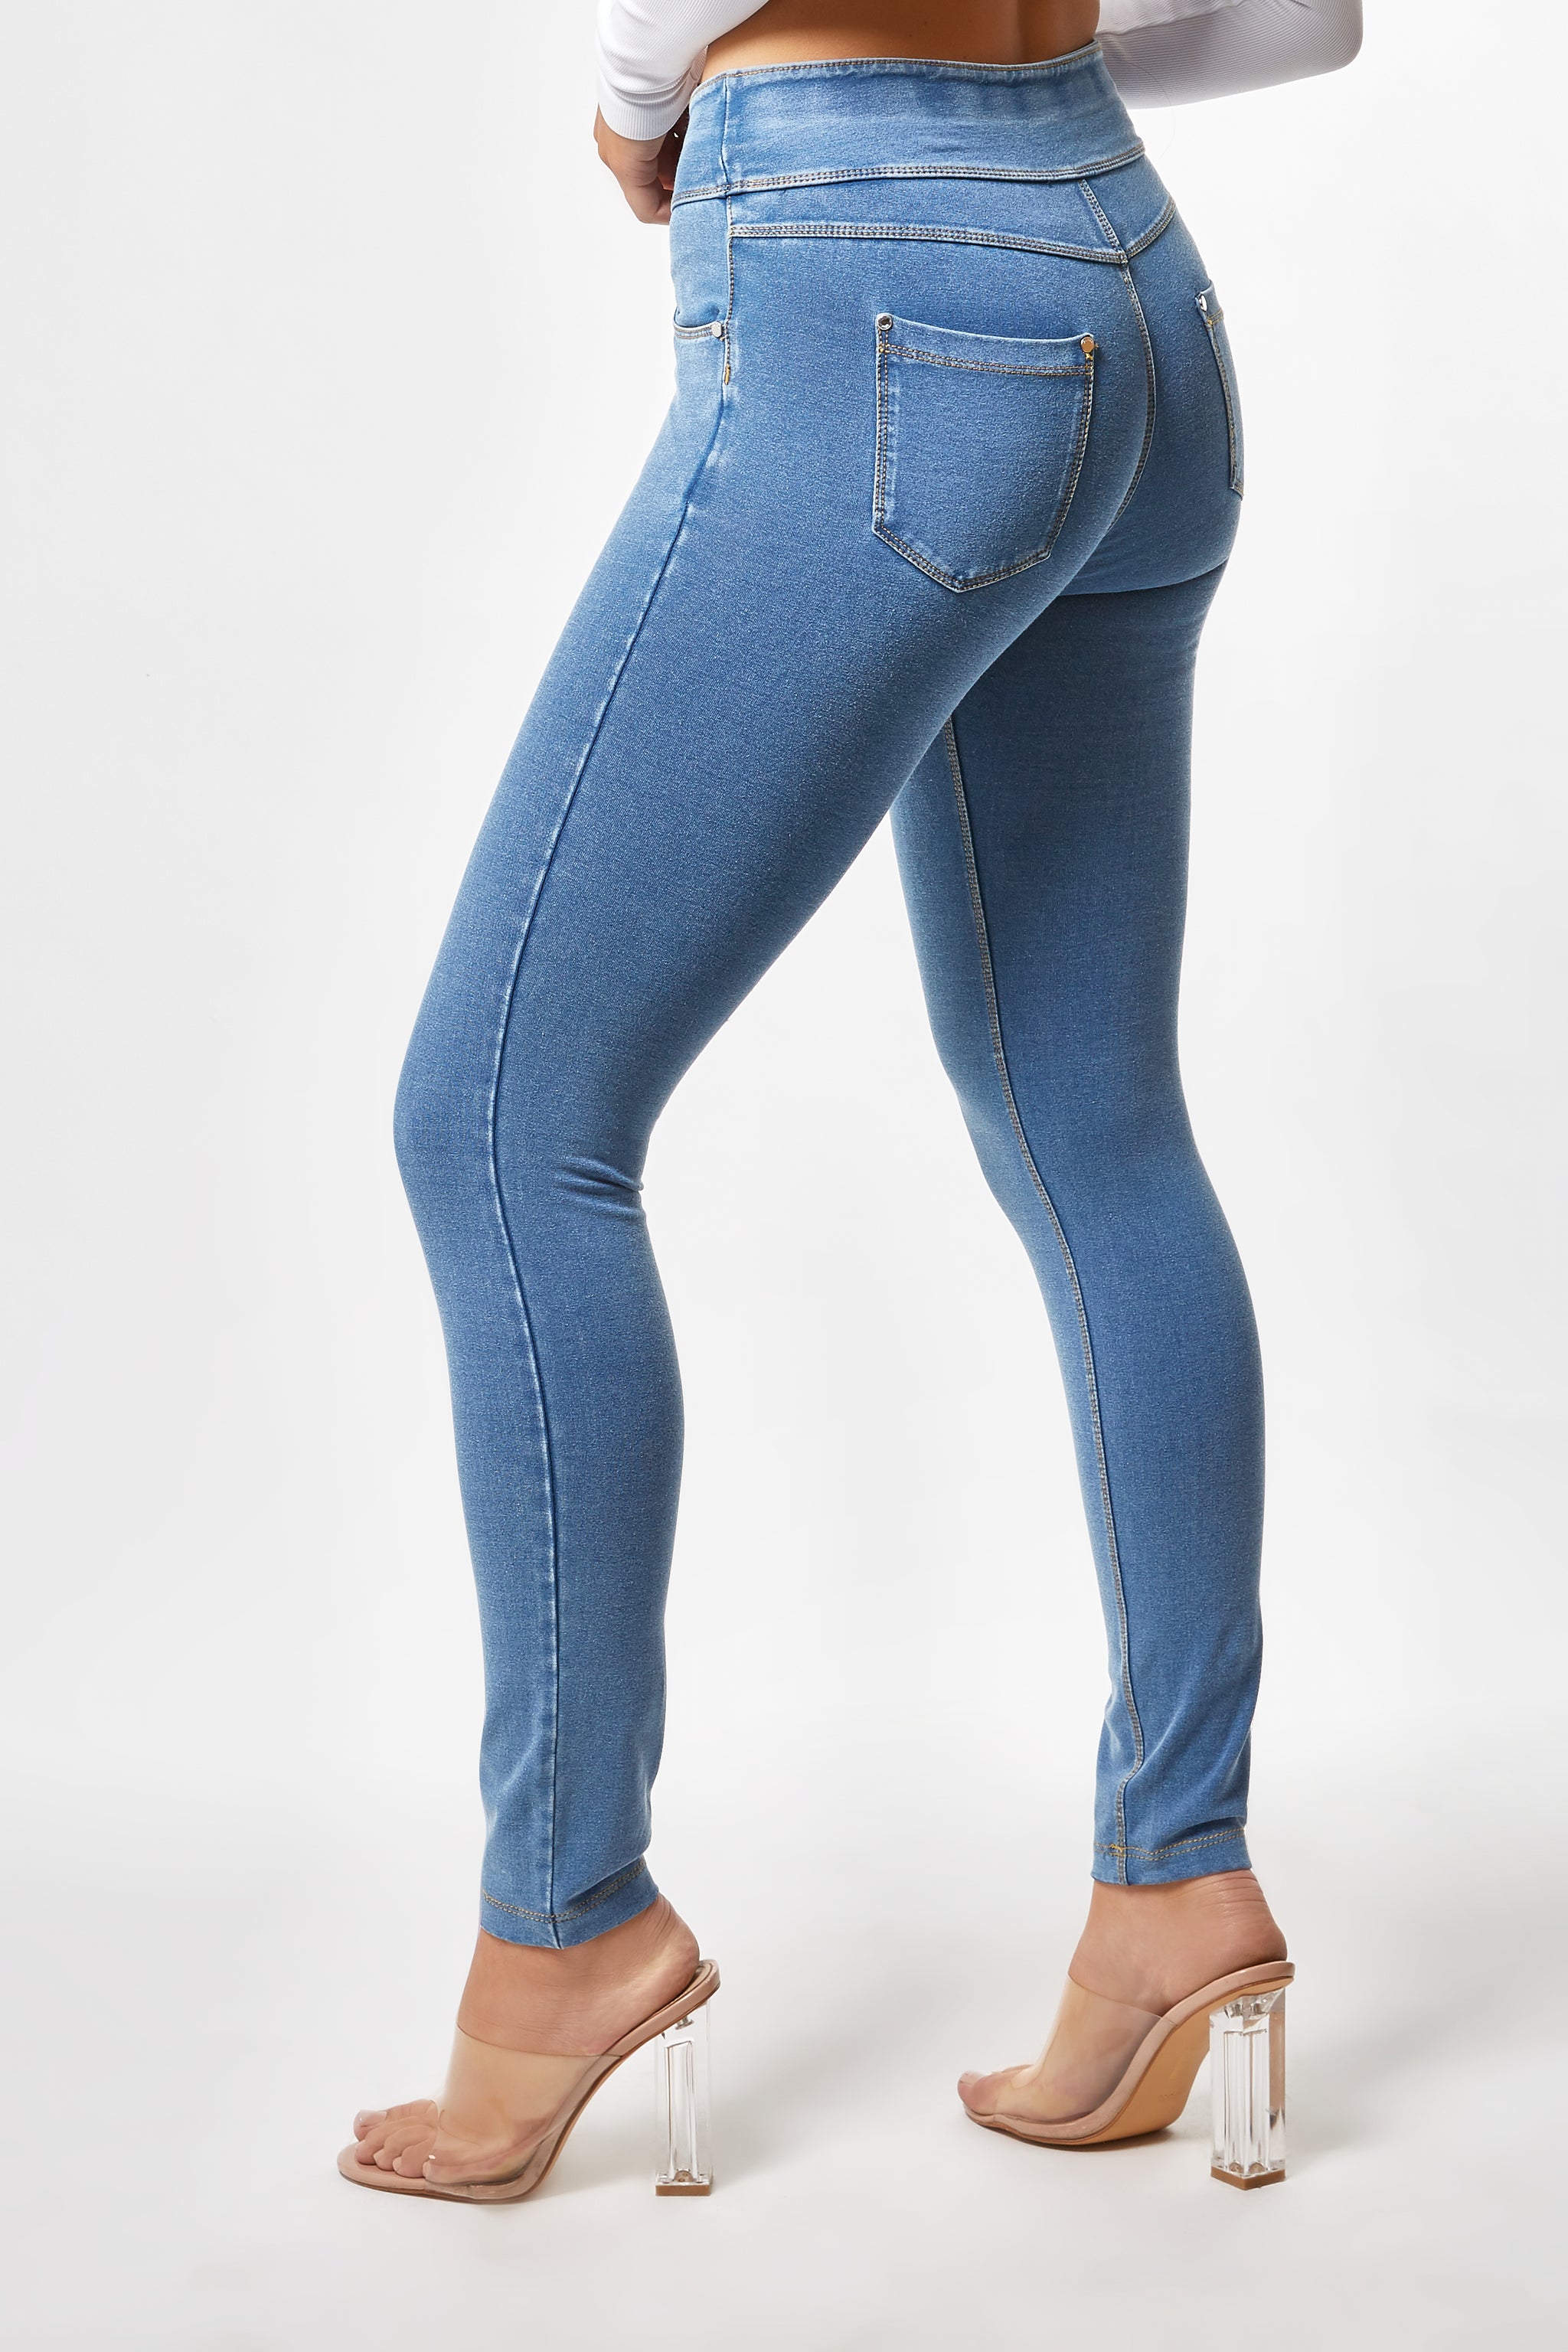 Second Denim Yoga Jeans, Yoga Jeans Canada, Yoga Jeans Review, Yoga Jeans  Online Shop, Yoga Jeans Online USA, Second Denim Yoga Jeans Sale, Yoga  Jeans Best Price, High Rise Yoga Jeans Bootcut